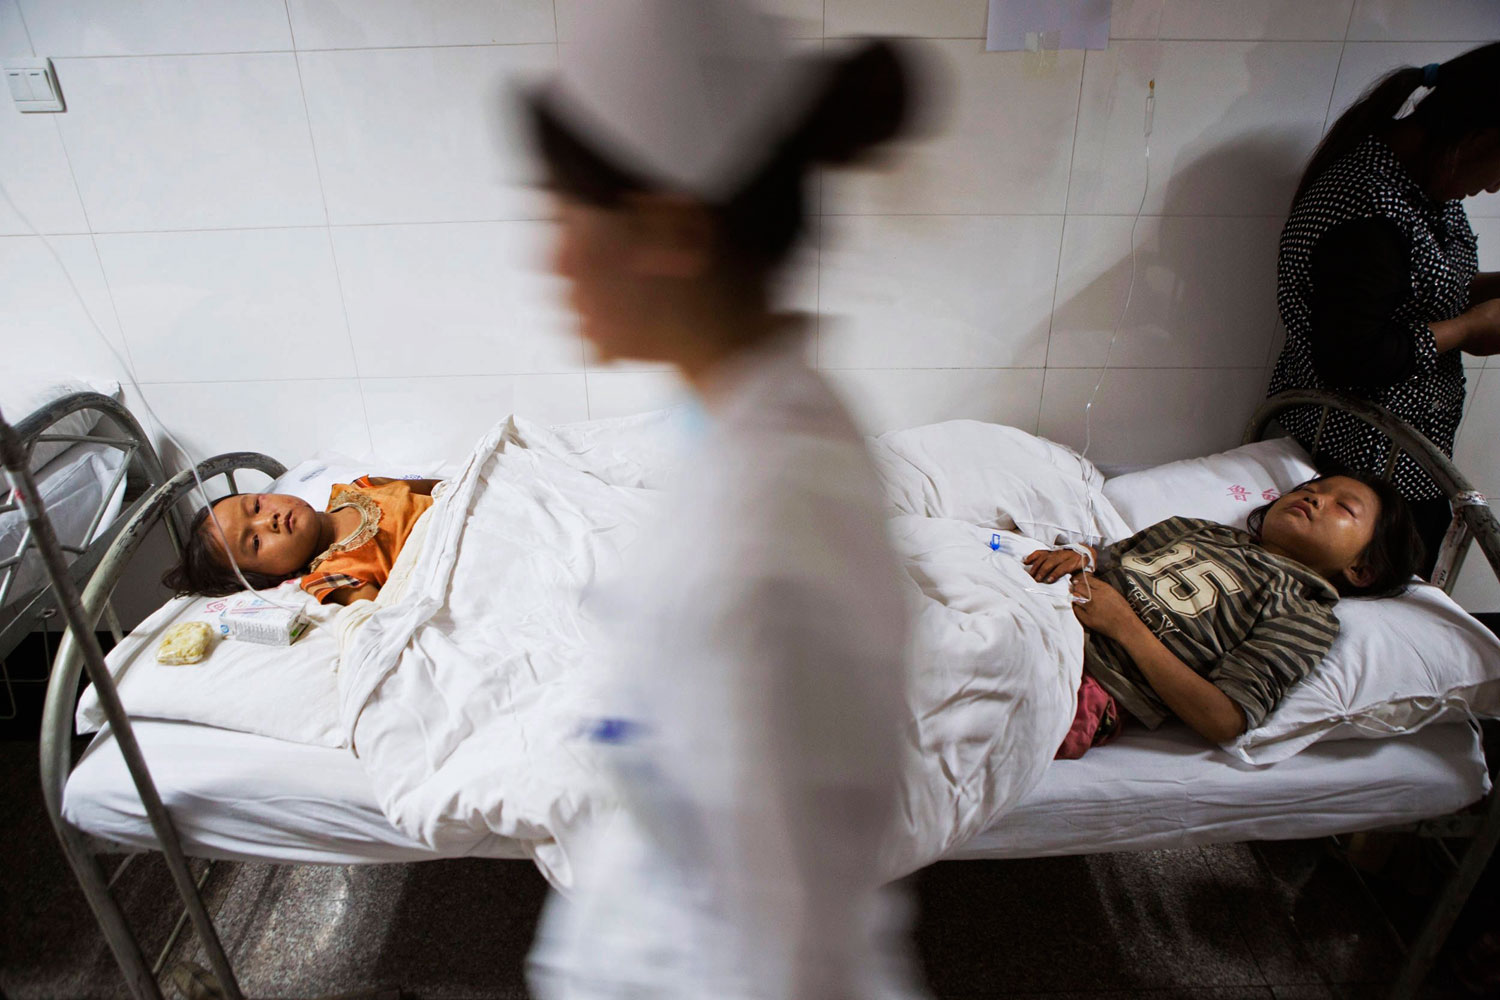 Children are treated at a hospital in Ludian county, after a magnitude 6.3 earthquake hit Zhaotong, Yunnan province on Aug. 3, 2014. The earthquake struck southwestern China on Sunday, killing at least 367 people and leaving 1,881 injured in a remote area of Yunnan province, and causing thousands of buildings, including a school, to collapse.